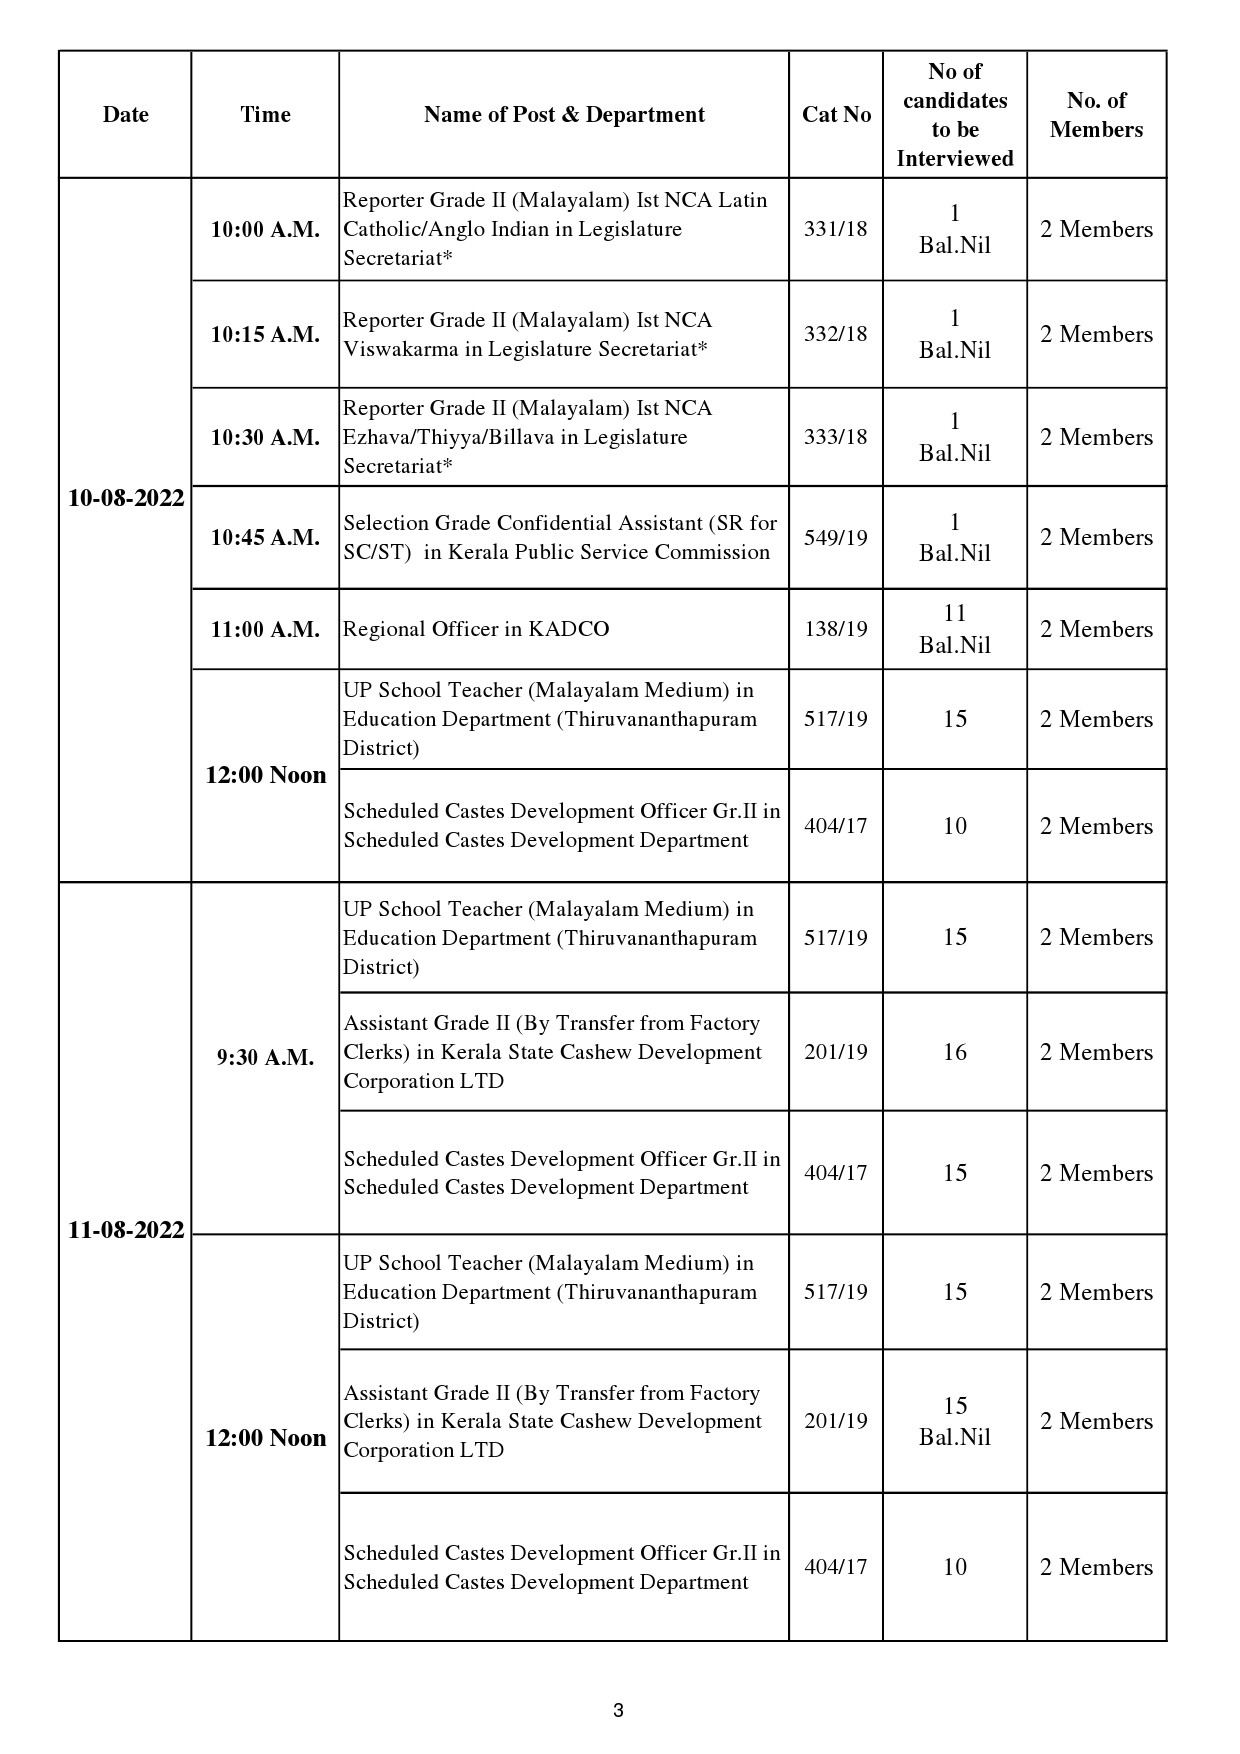 Revised Interview Programme For The Month Of August 2022 - Notification Image 3